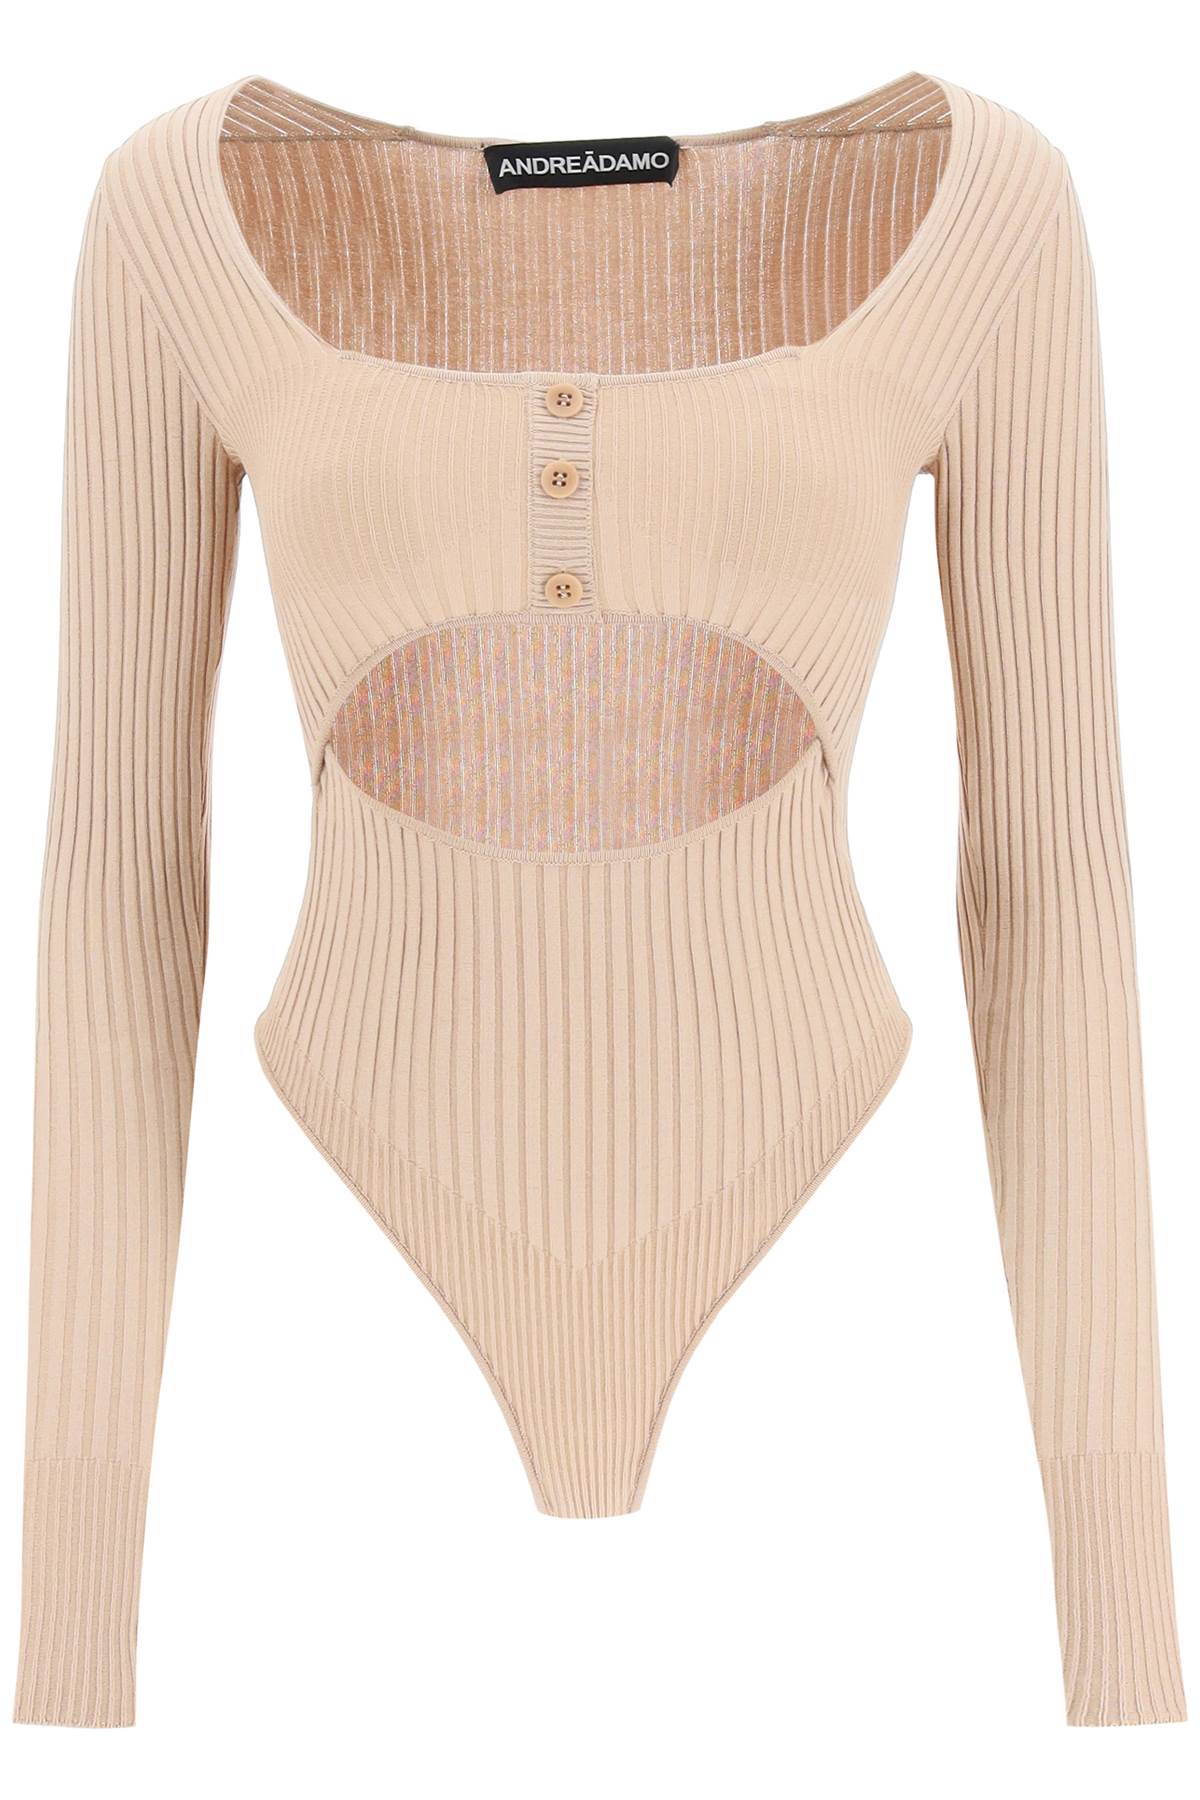 ANDREADAMO Knit Bodysuit With Cut-out